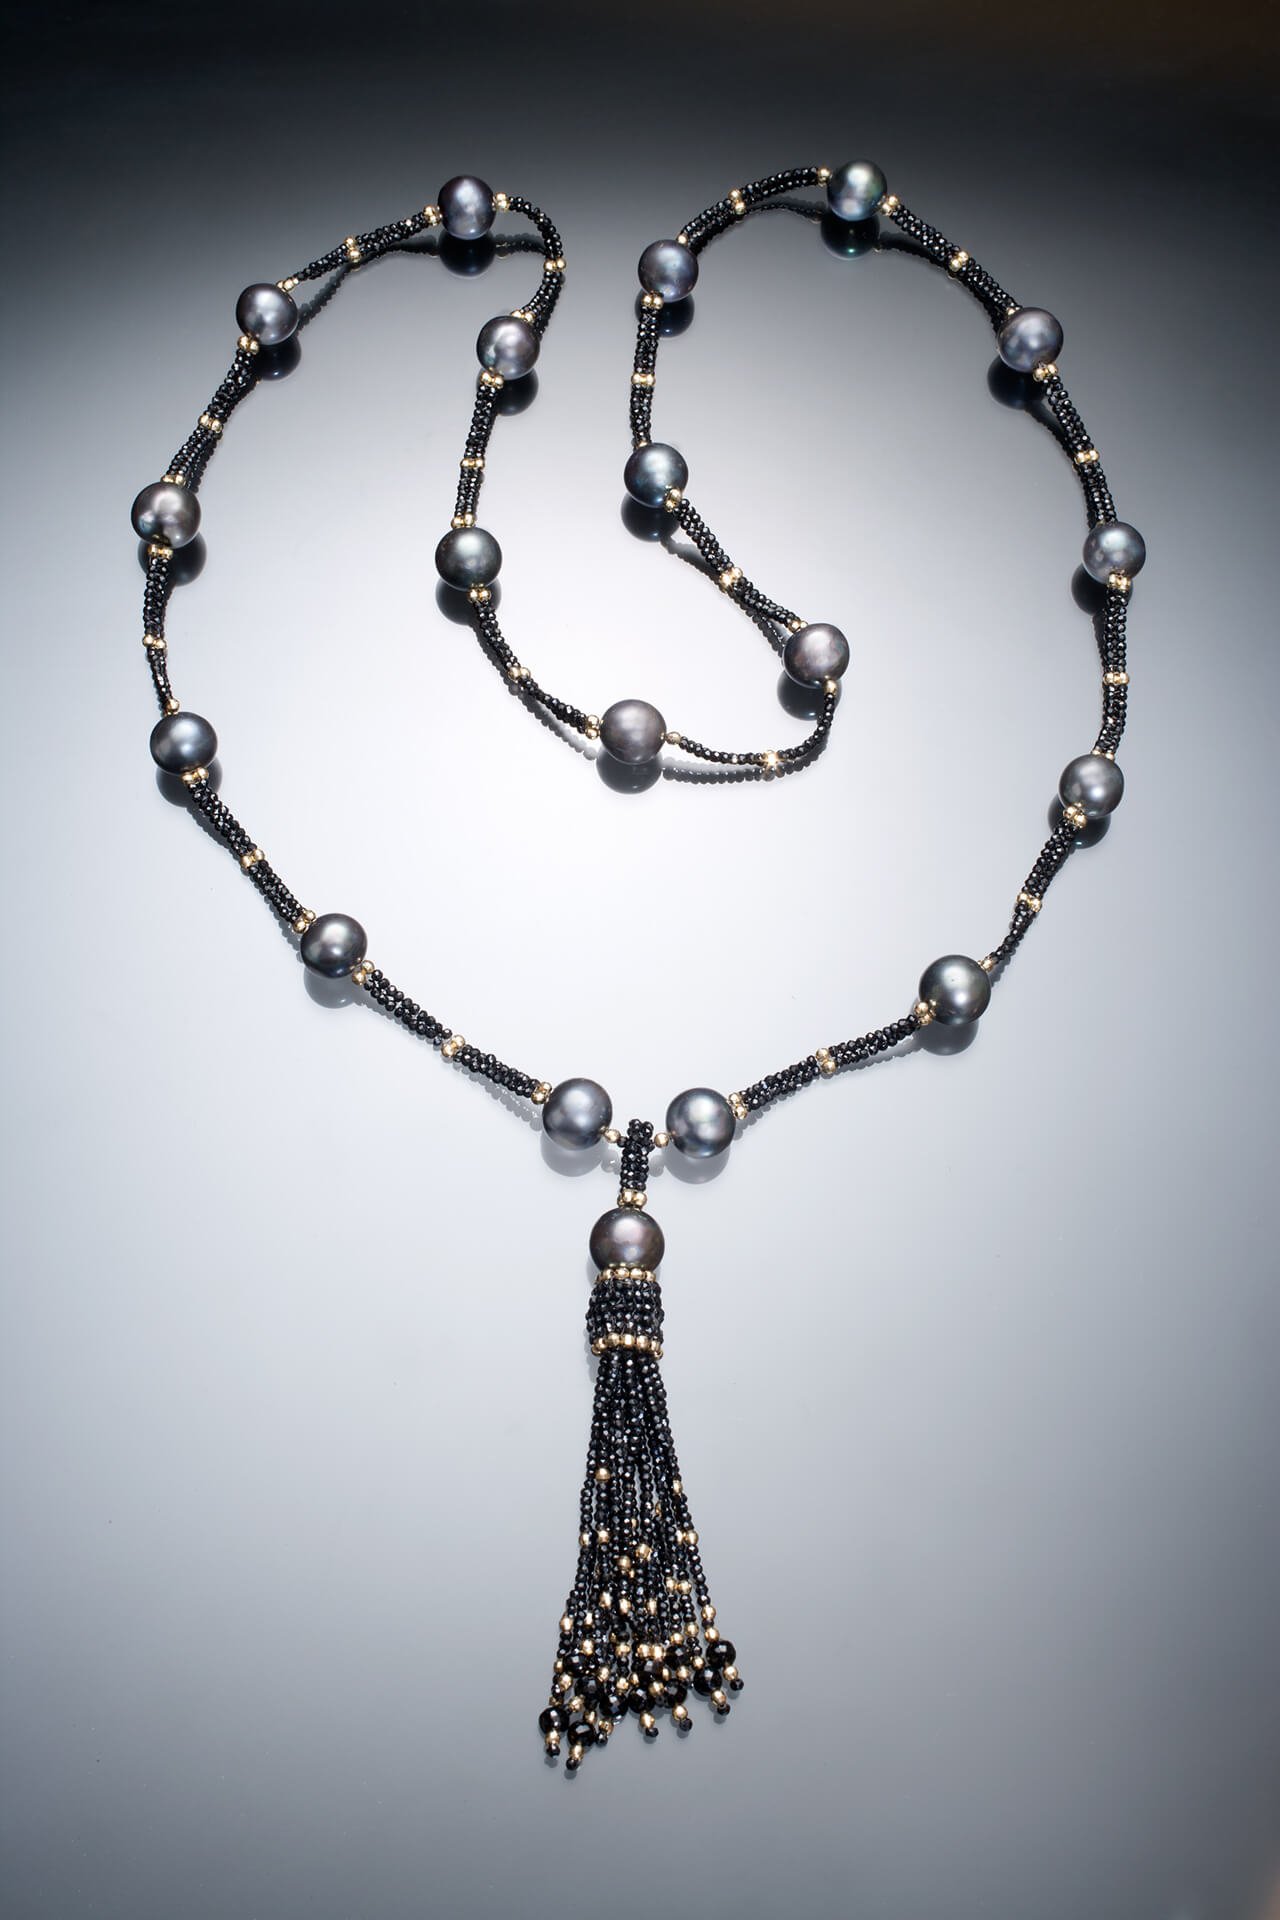 Deco Tassel. The tassel is hand woven of black spinel, and 14k beads, with a Tahitian pearl positioned at the top. The tassel hangs from a very long necklace made of the same materials.